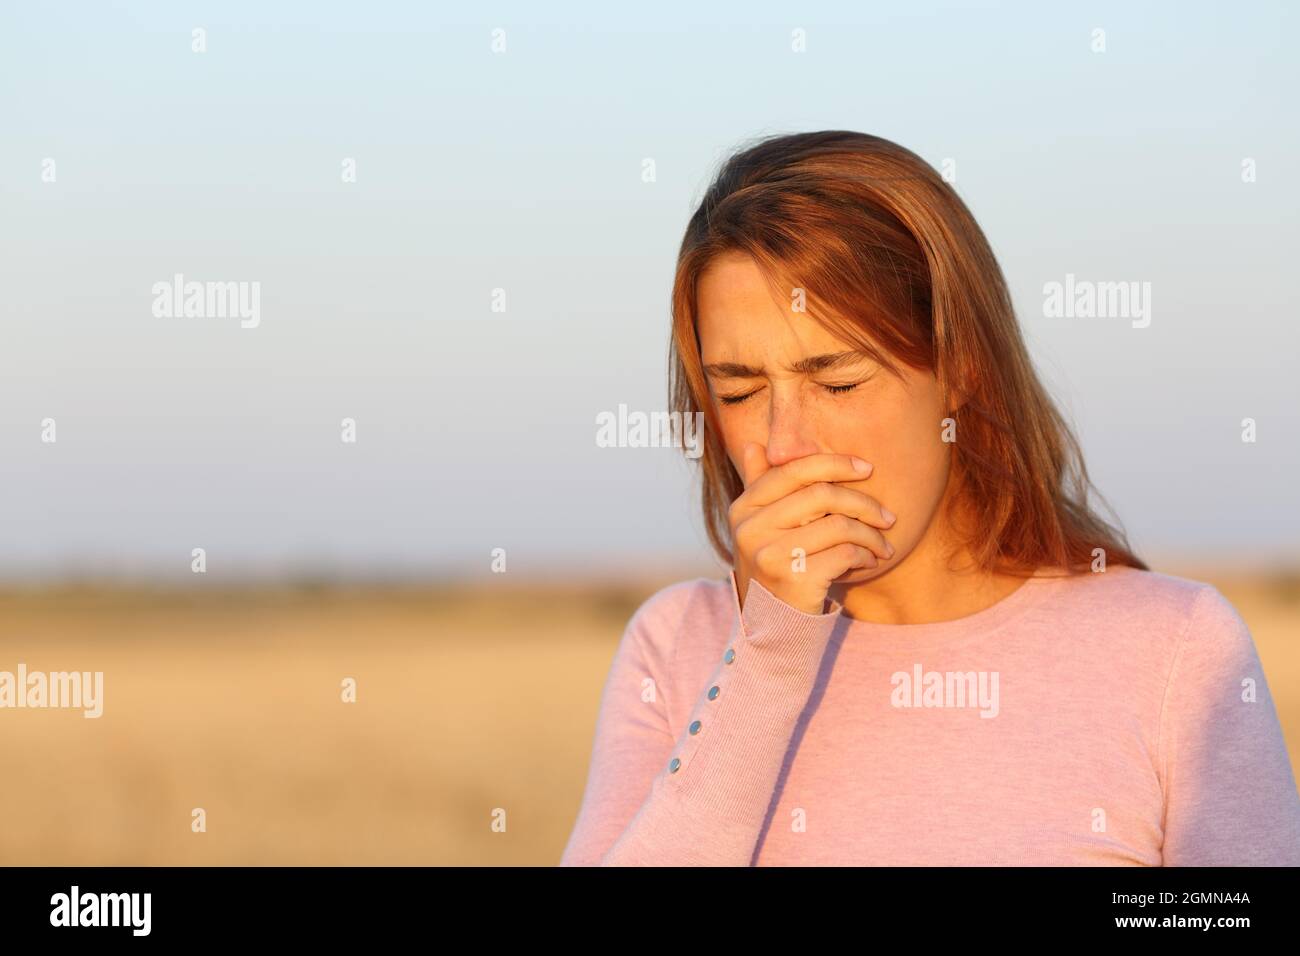 Ill woman coughing in a harvested field at sunset Stock Photo